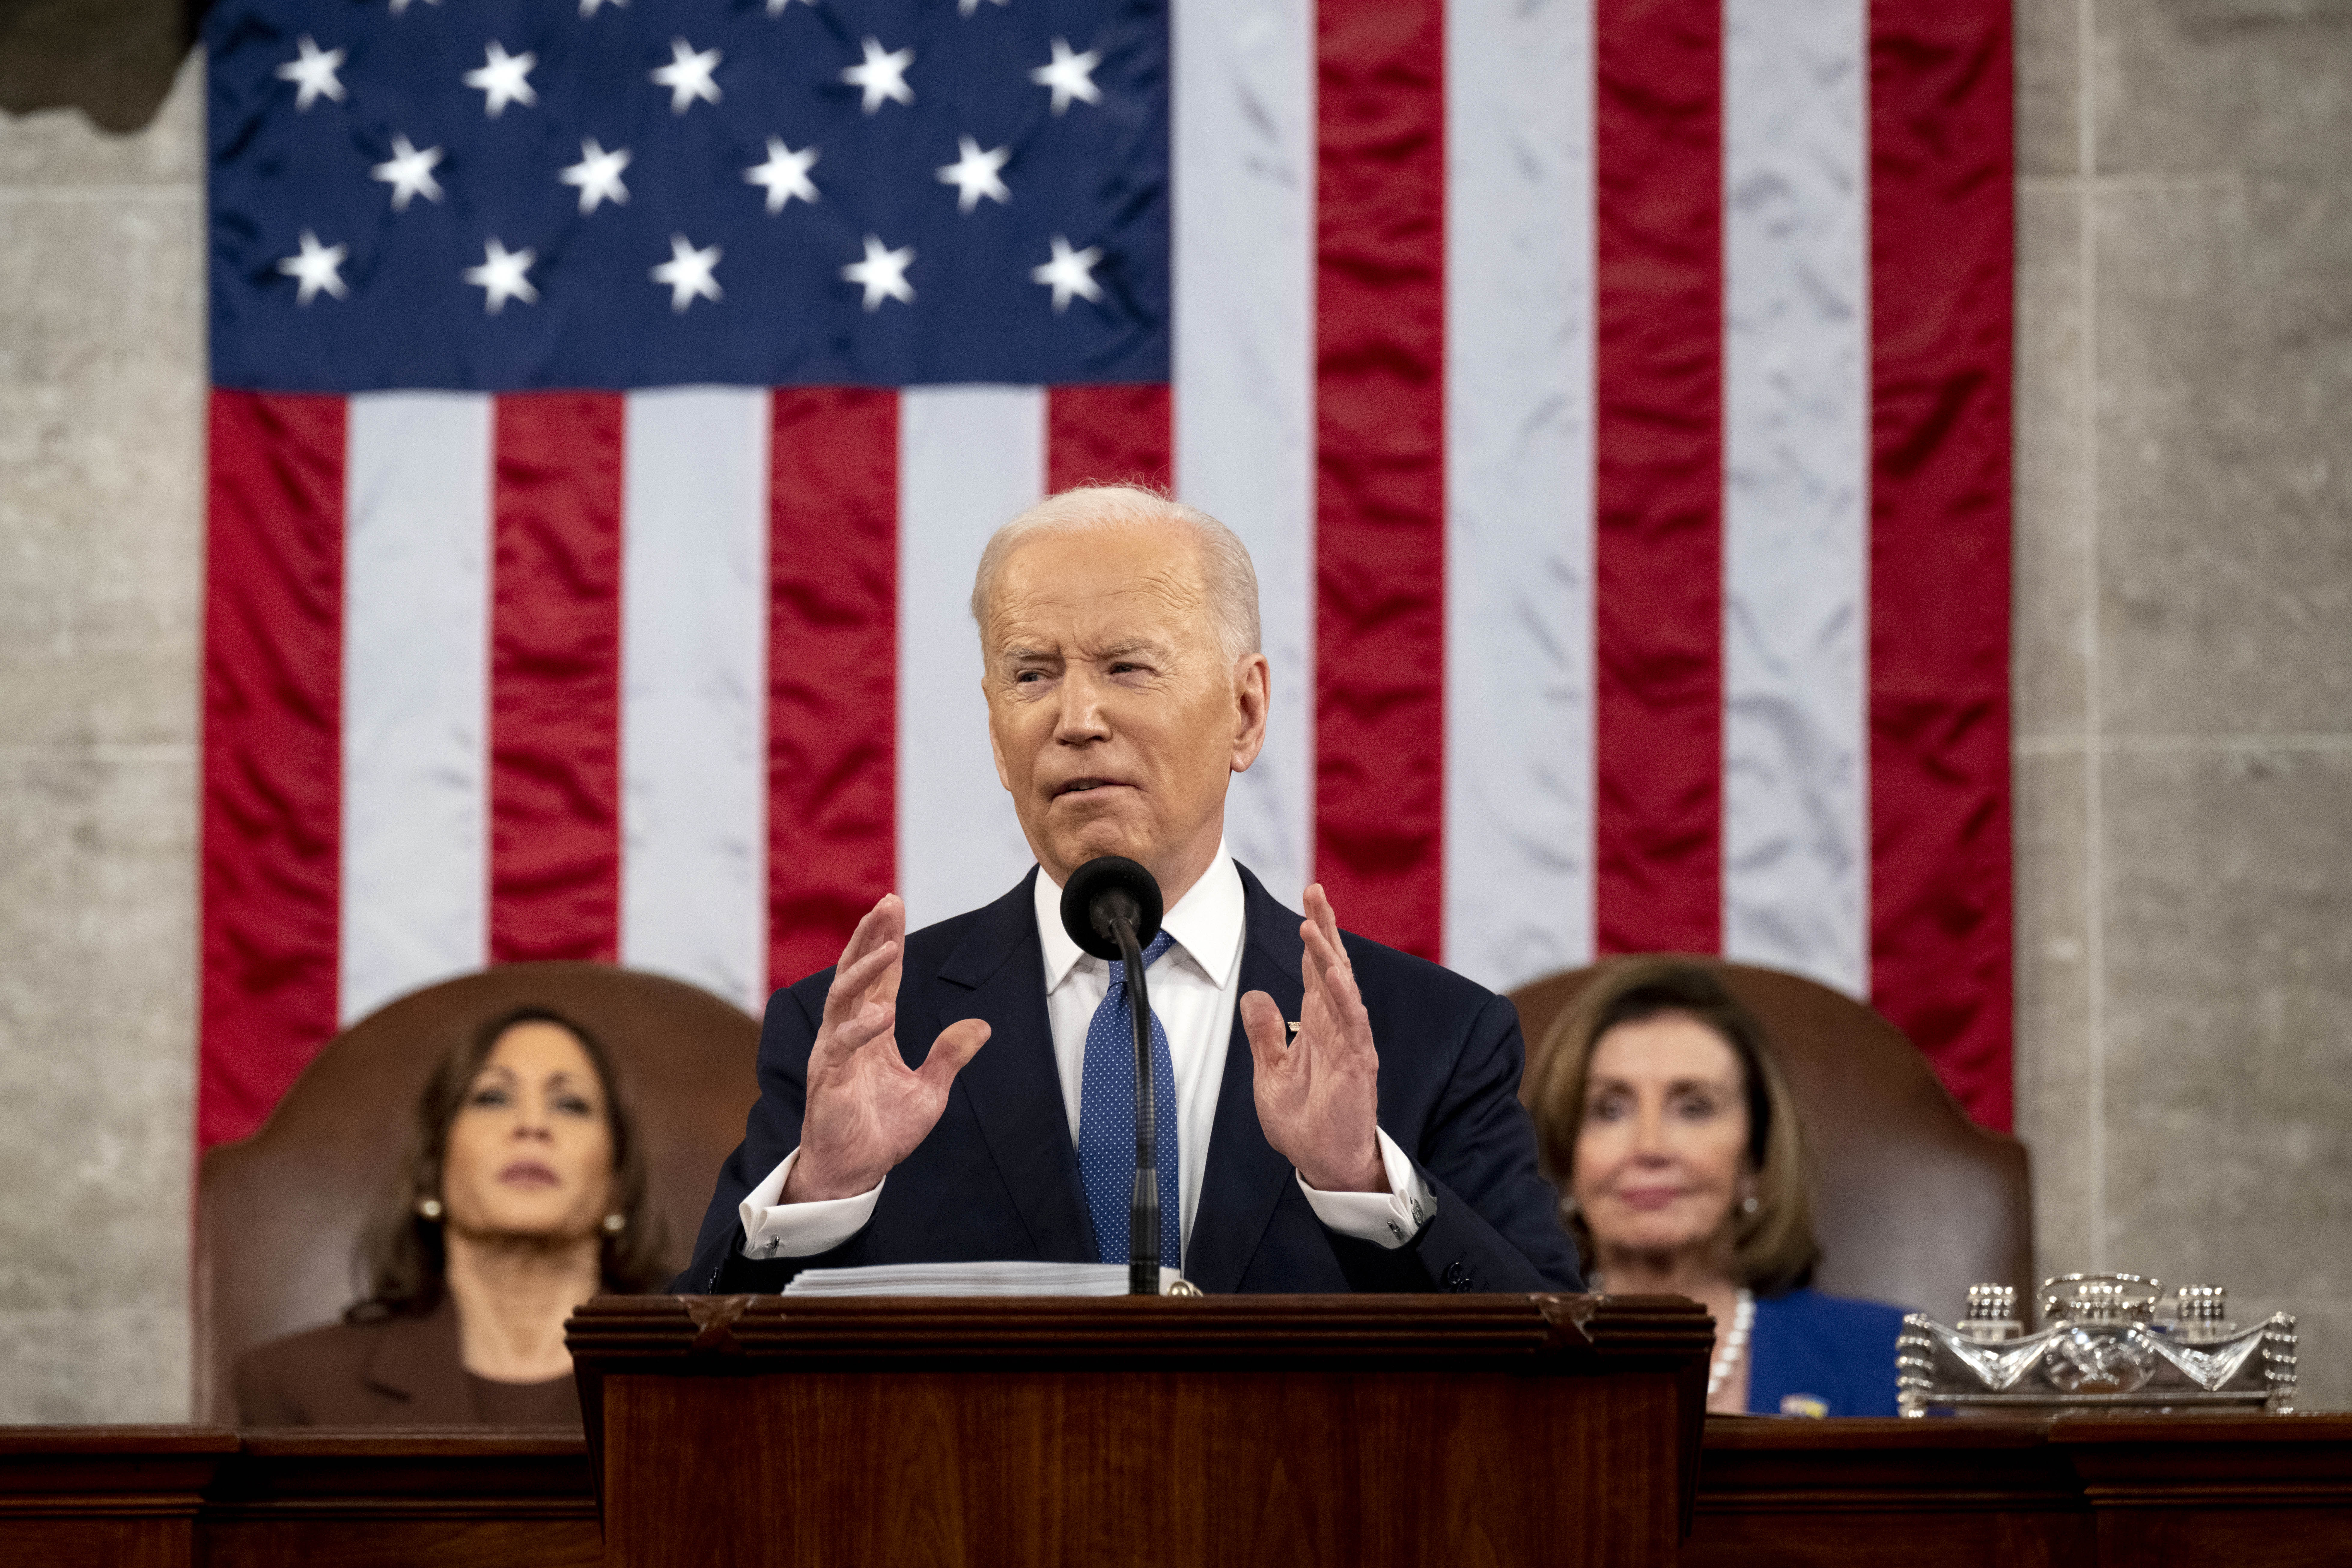 March 1, 2022; Washington, DC, USA; U.S. President Joe Biden delivers the State of the Union address from the House chamber of the United States Capitol in Washington. Mandatory Credit: Saul Loeb/Pool via USA TODAY NETWORK